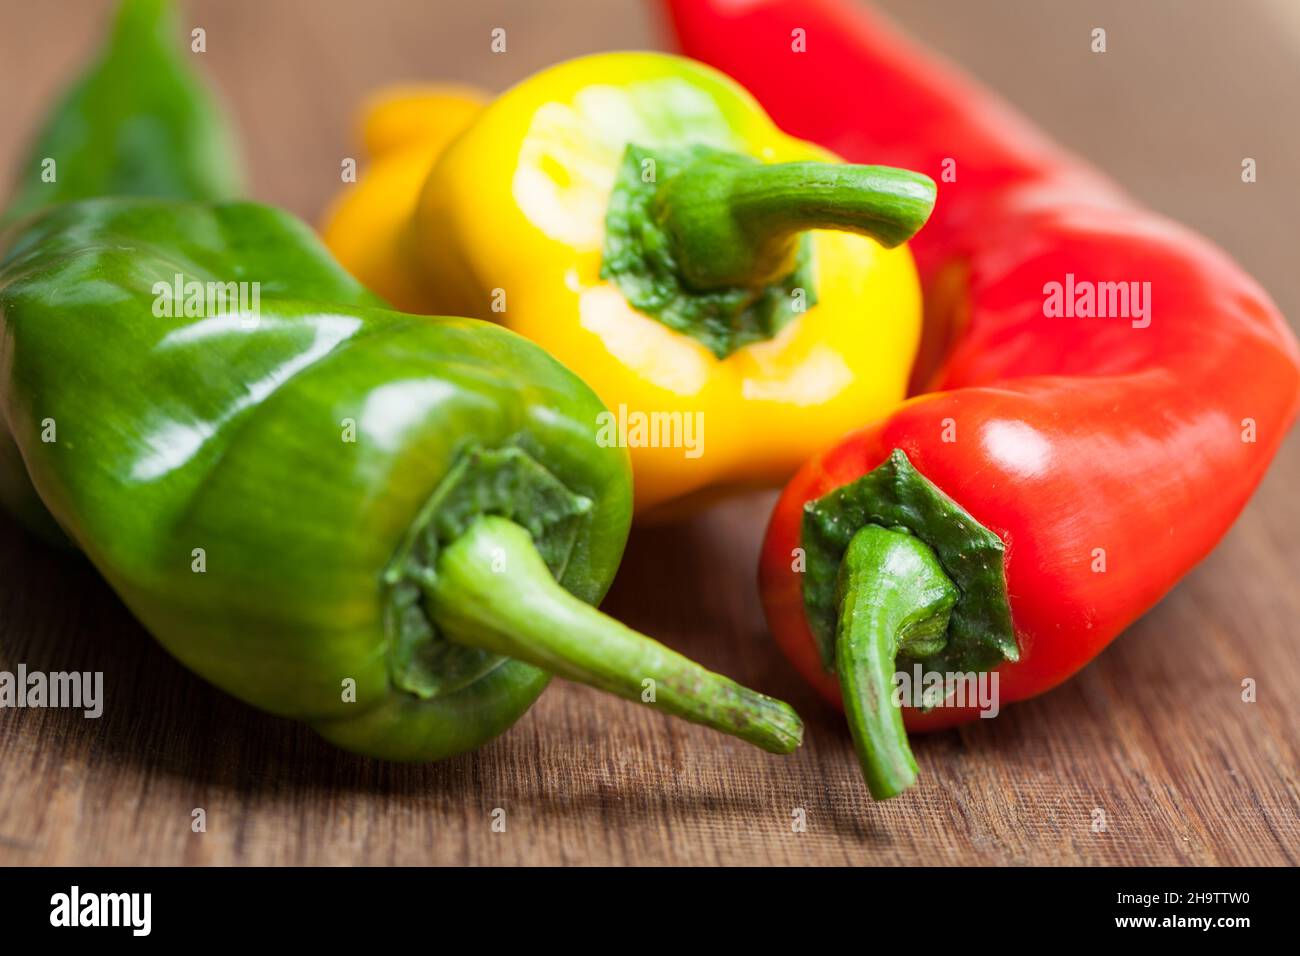 Peppers, colorful, colorful, vegetable, wooden board, food, close-up, food, background, wood, green peppers, green board, red, standing, multiple colo Stock Photo